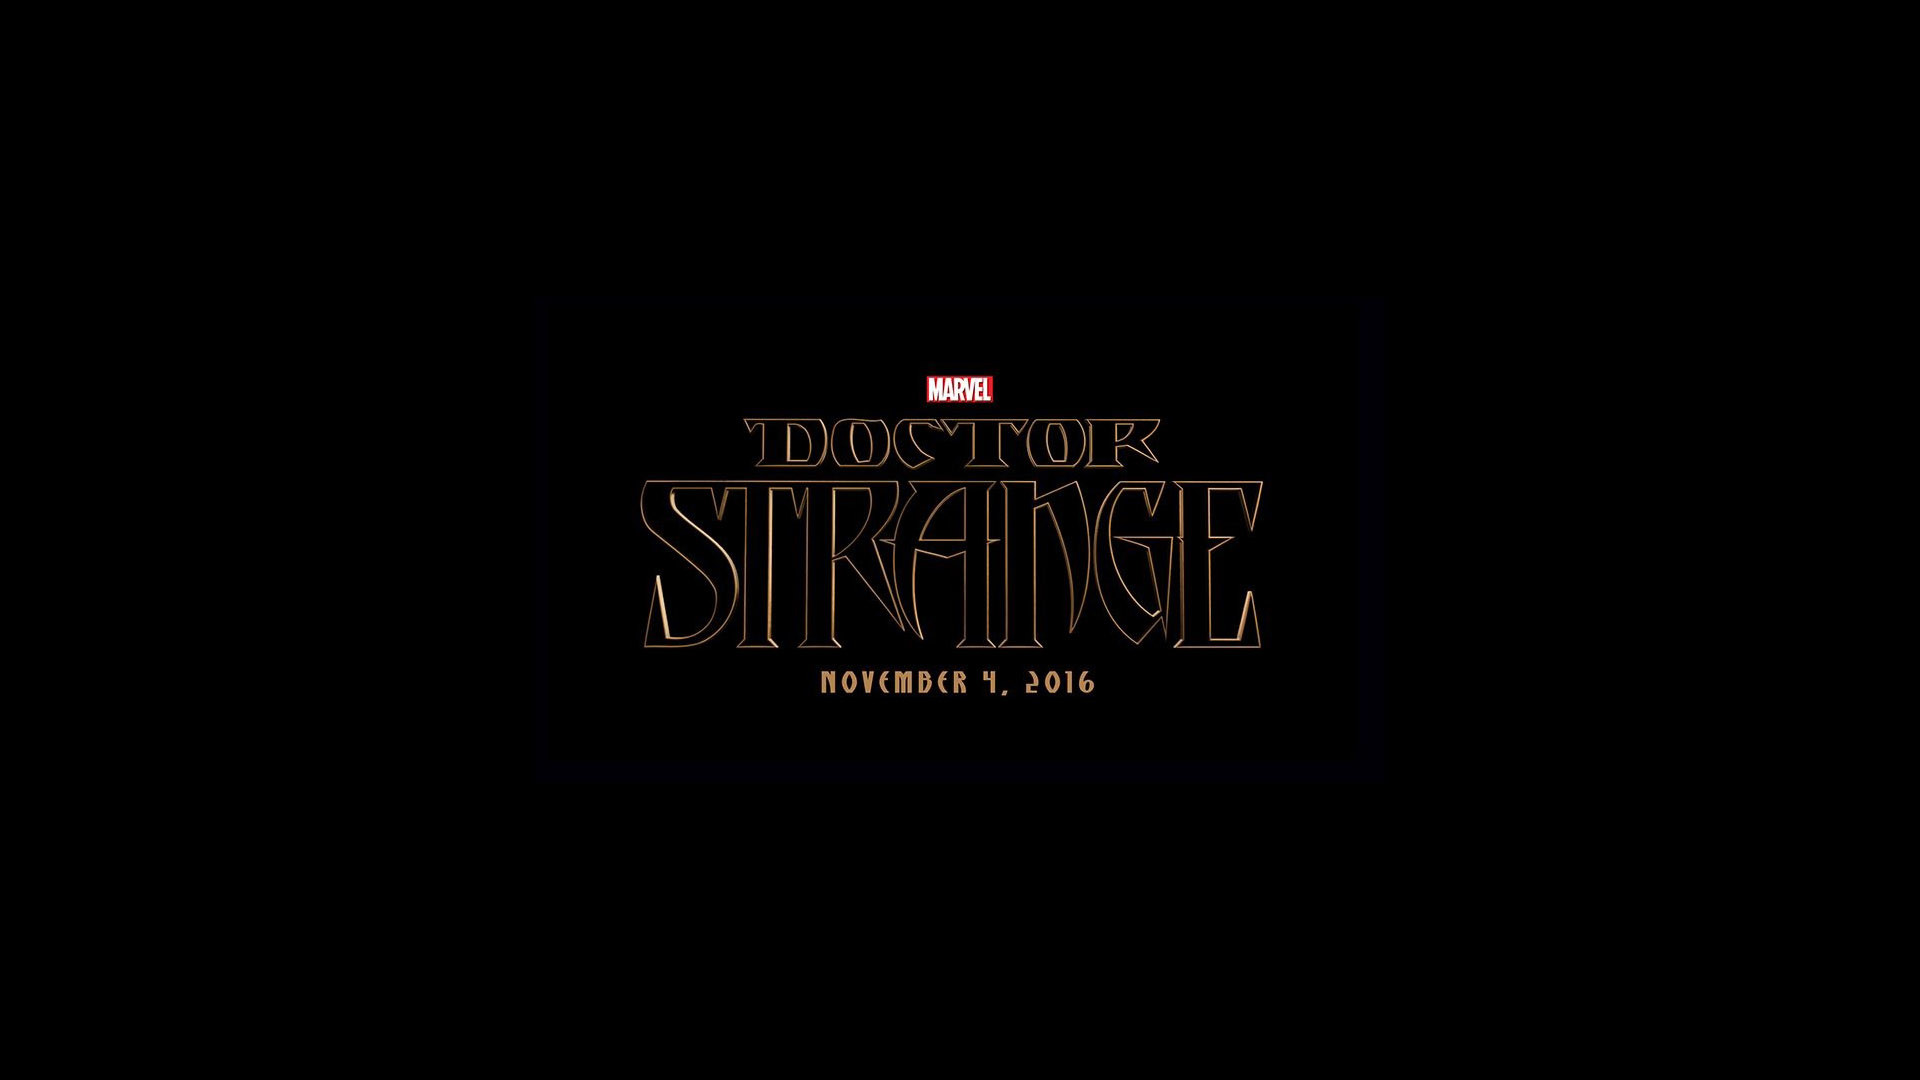 Hd Doctor Strange Movie Wallpapers For Free 7 1920x1080